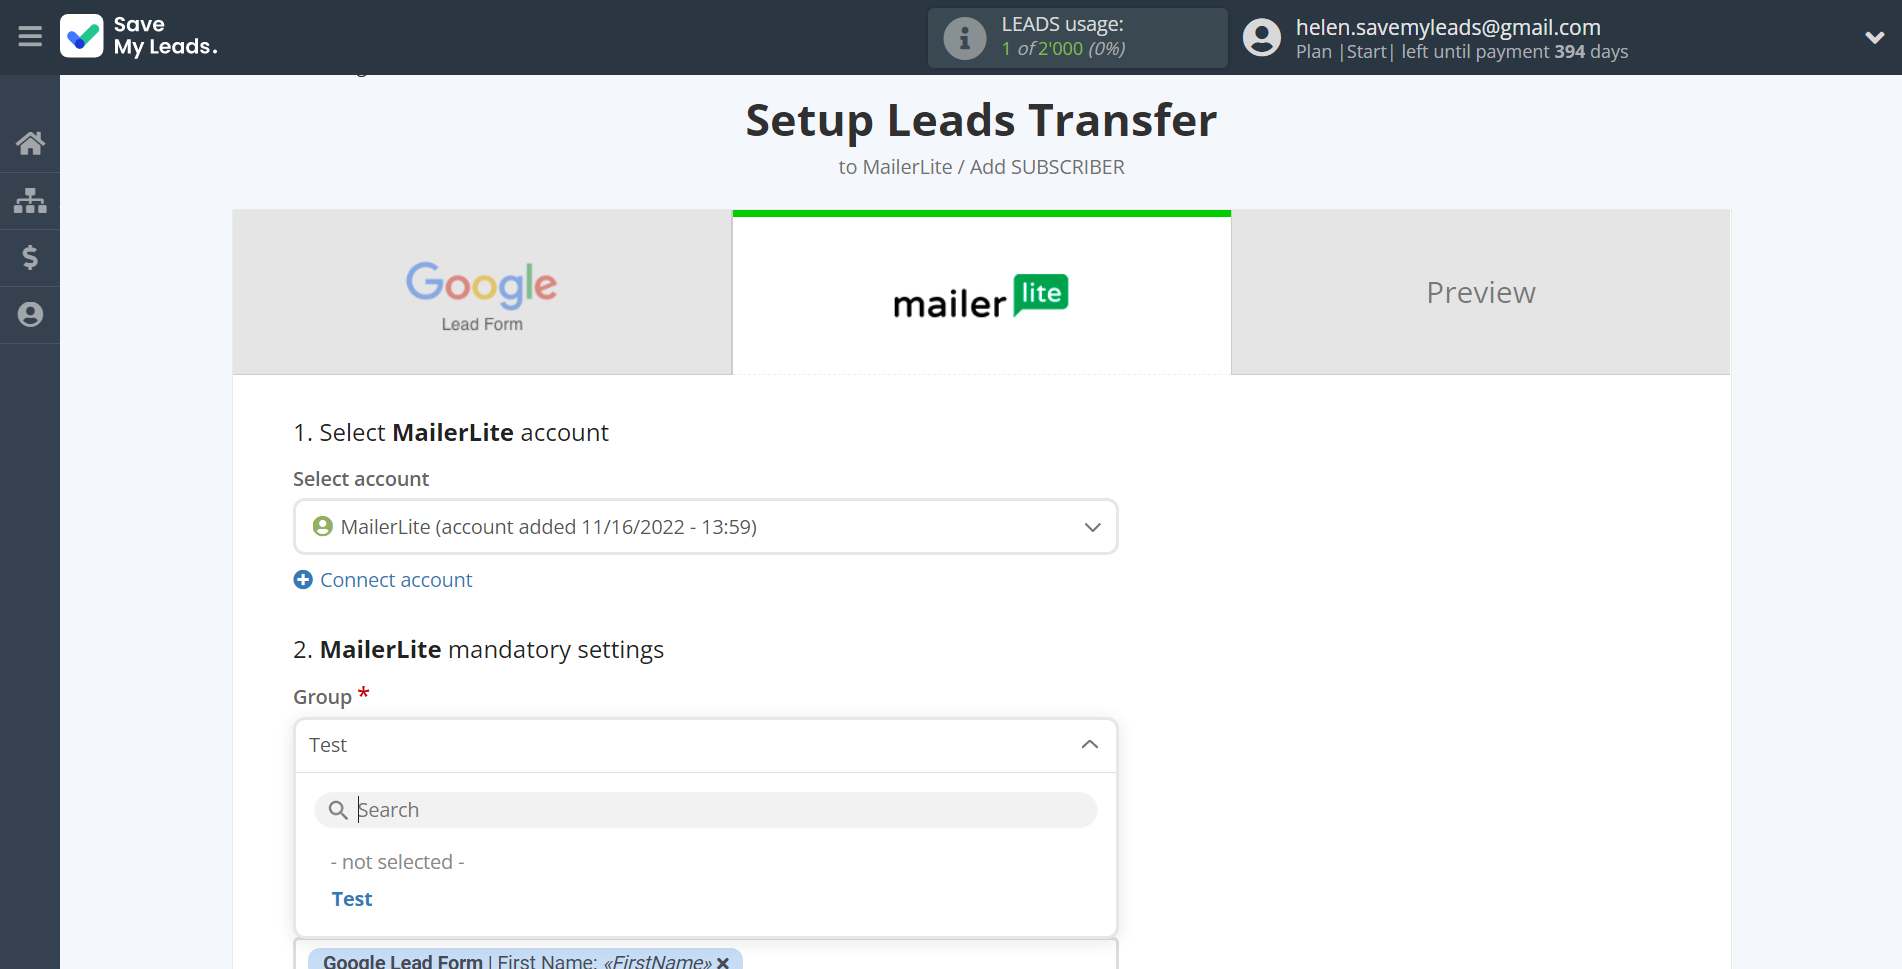 How to Connect Google Lead Form with MailerLite | Assigning fields